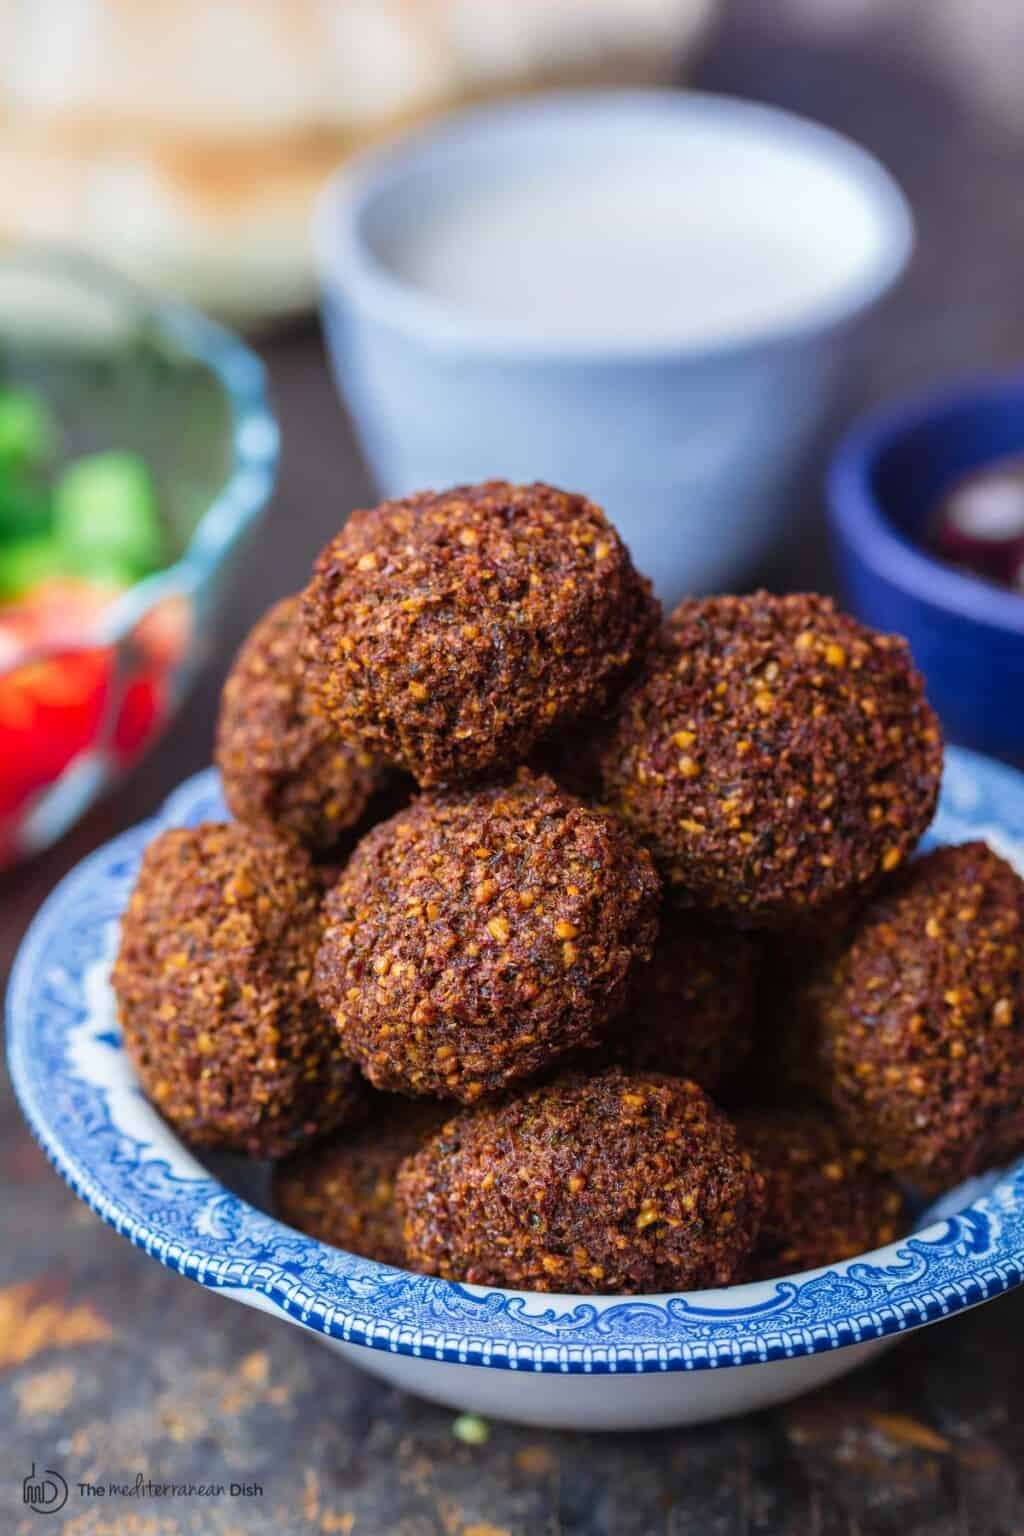 Easy Authentic Falafel Recipe: Step-by-Step | The Mediterranean Dish